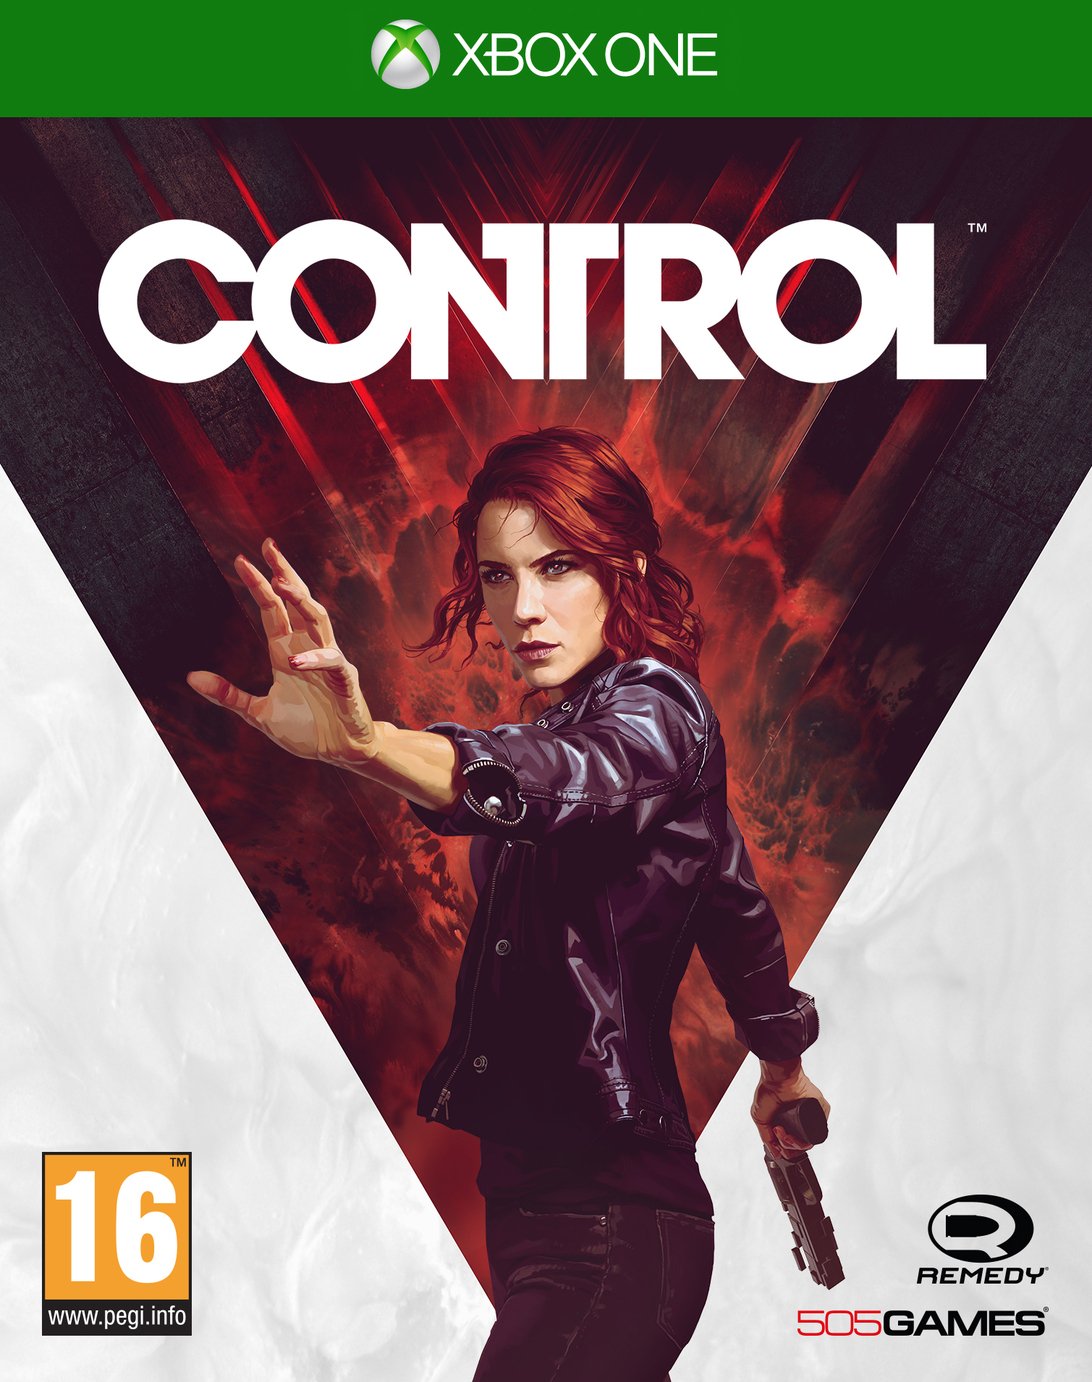 Control Xbox One Game